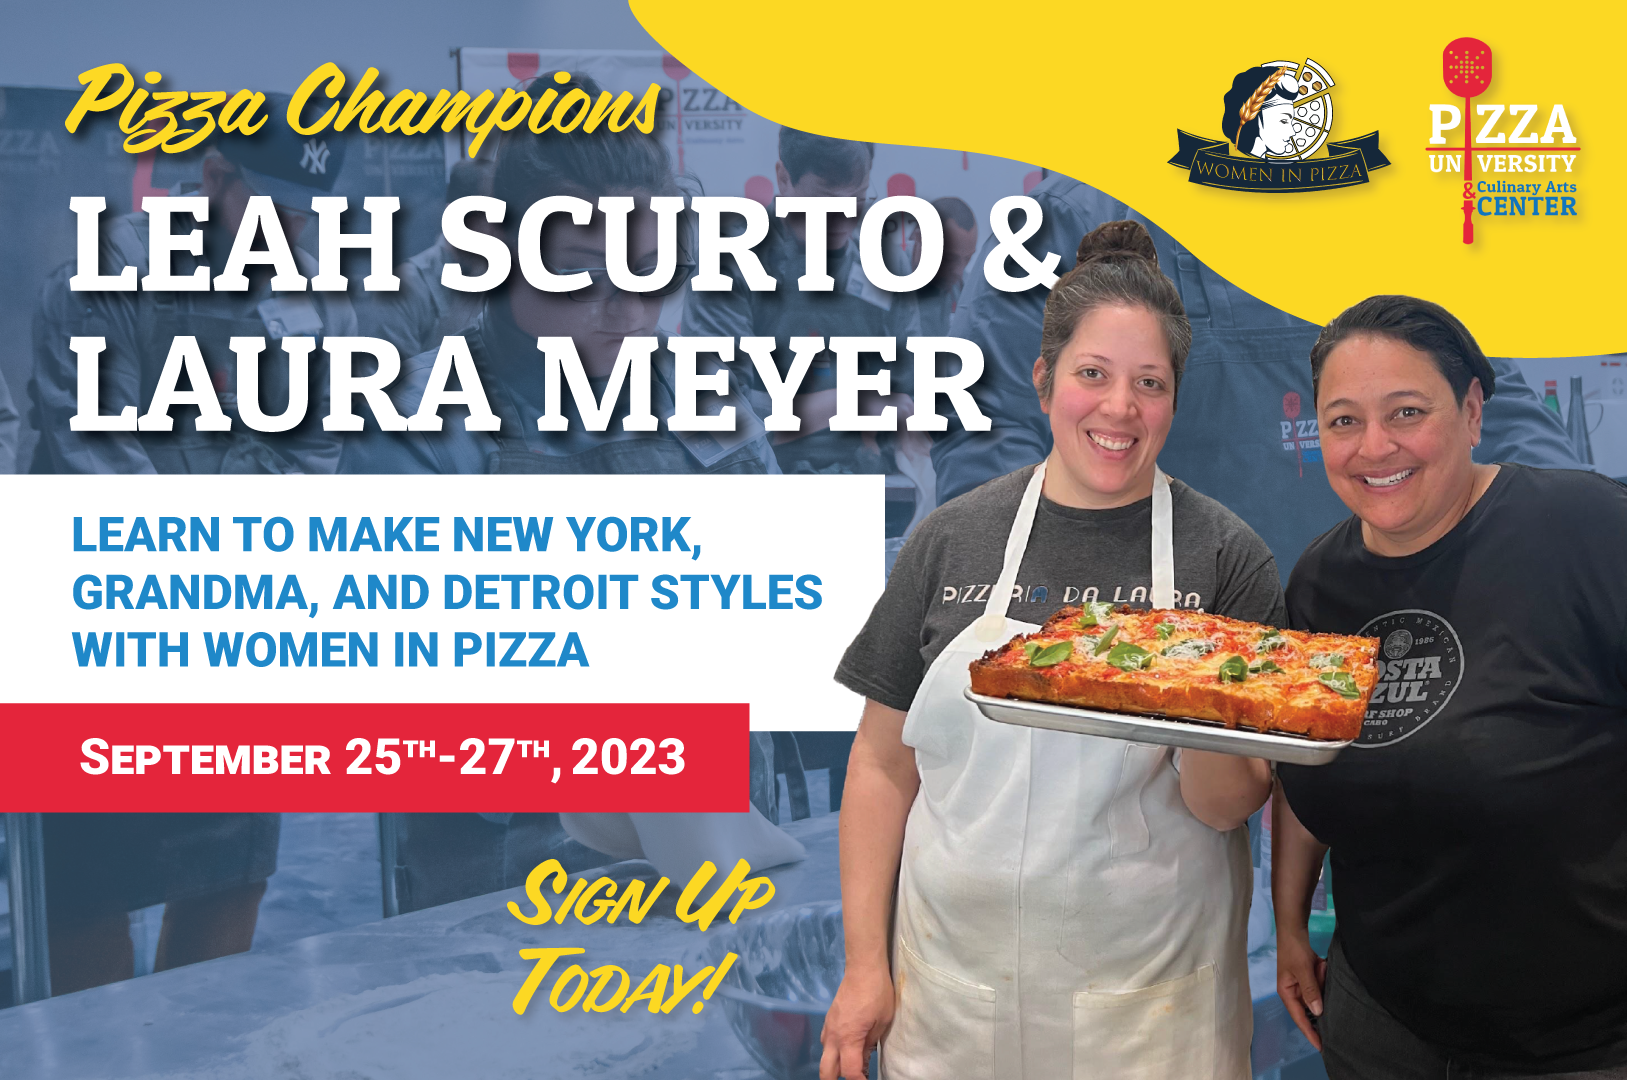 Learn to Make New York, Grandma, and Detroit-Styles with Women in Pizza